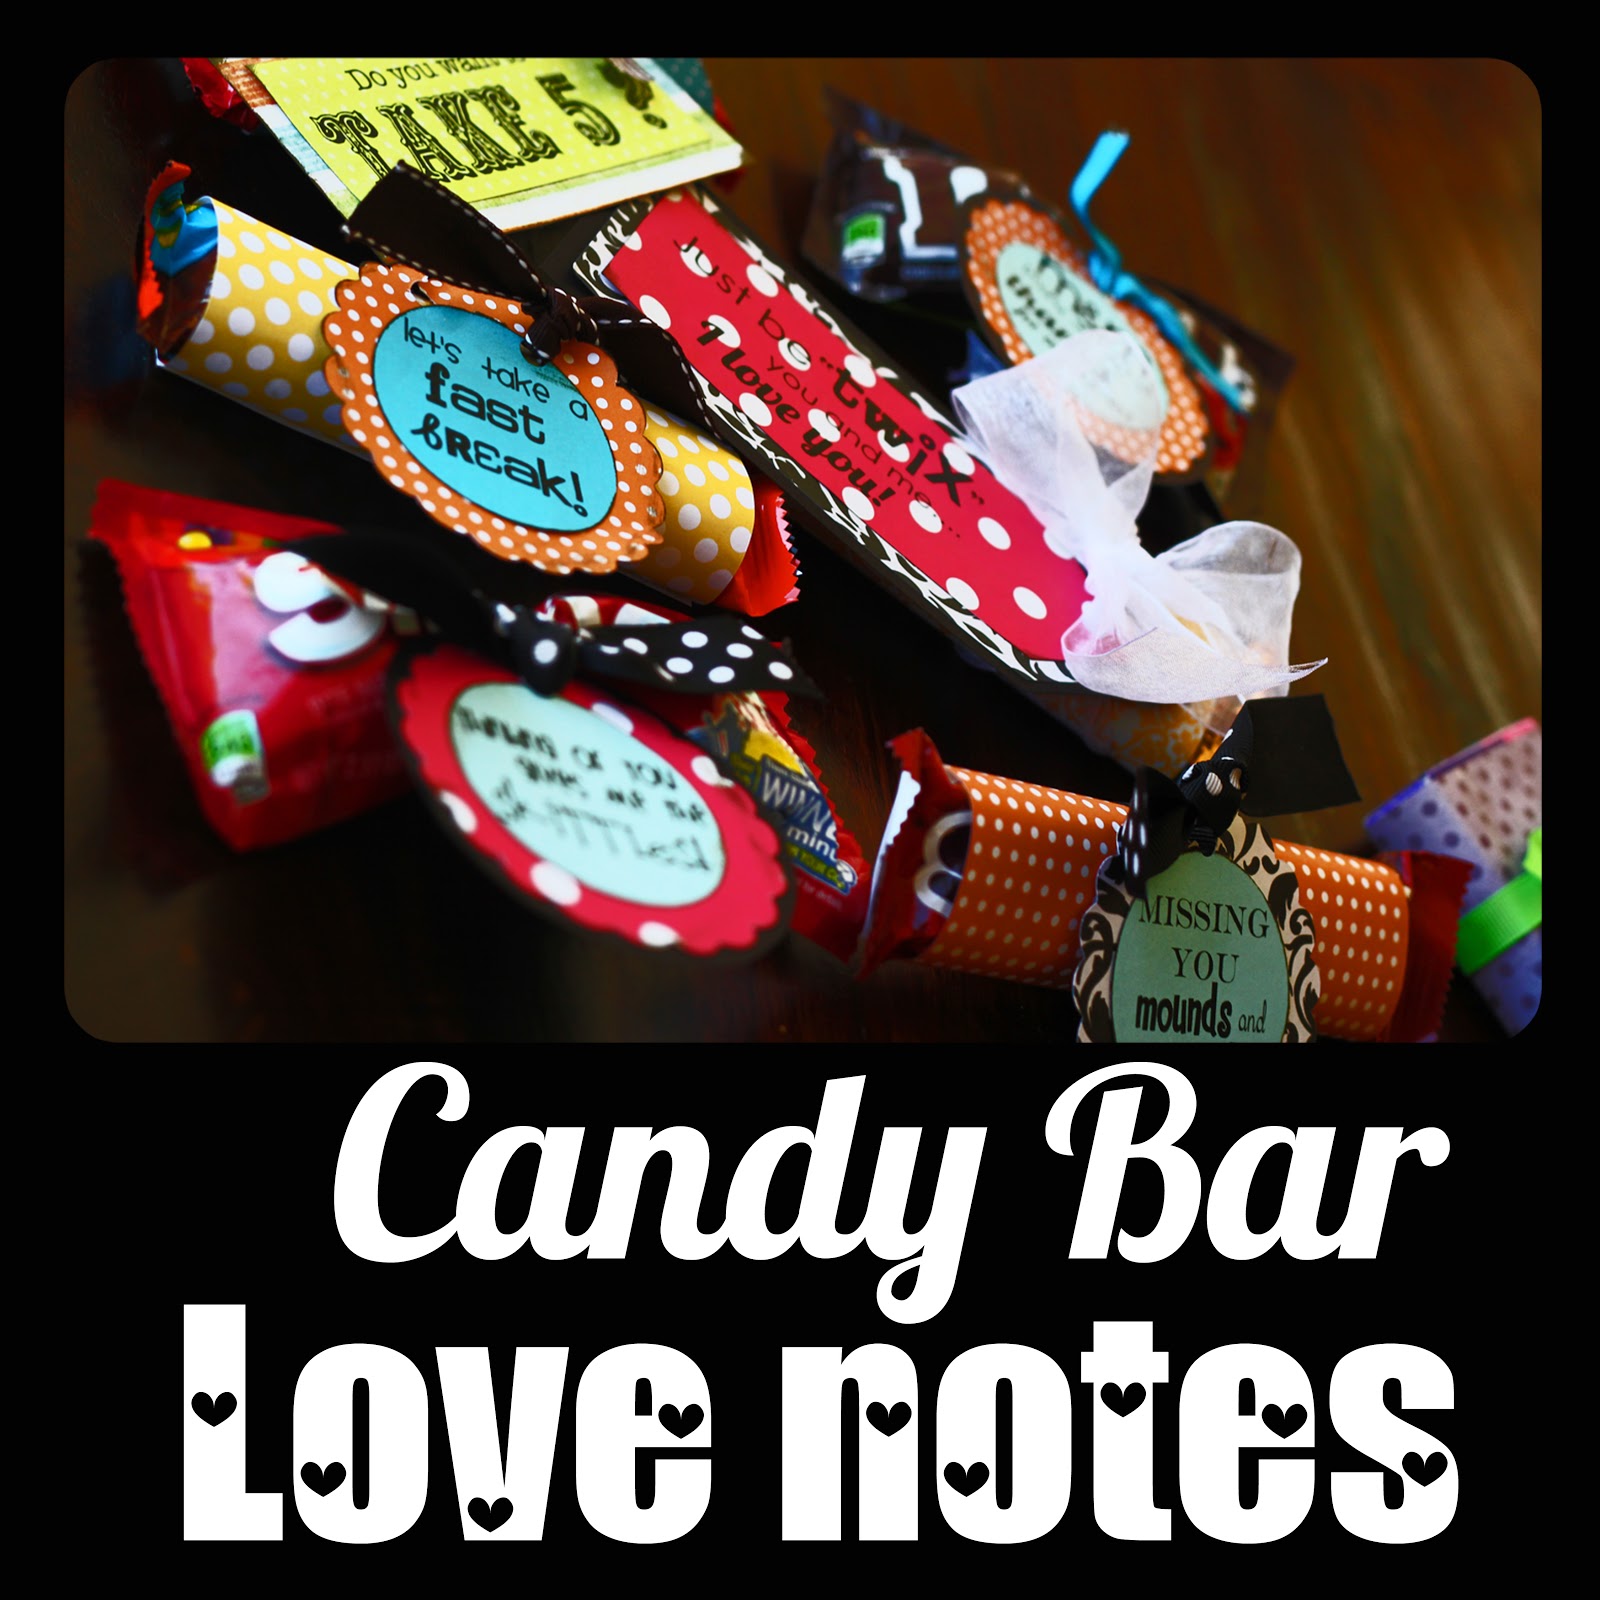 These candy bar love notes are intended for the Mister in your life...